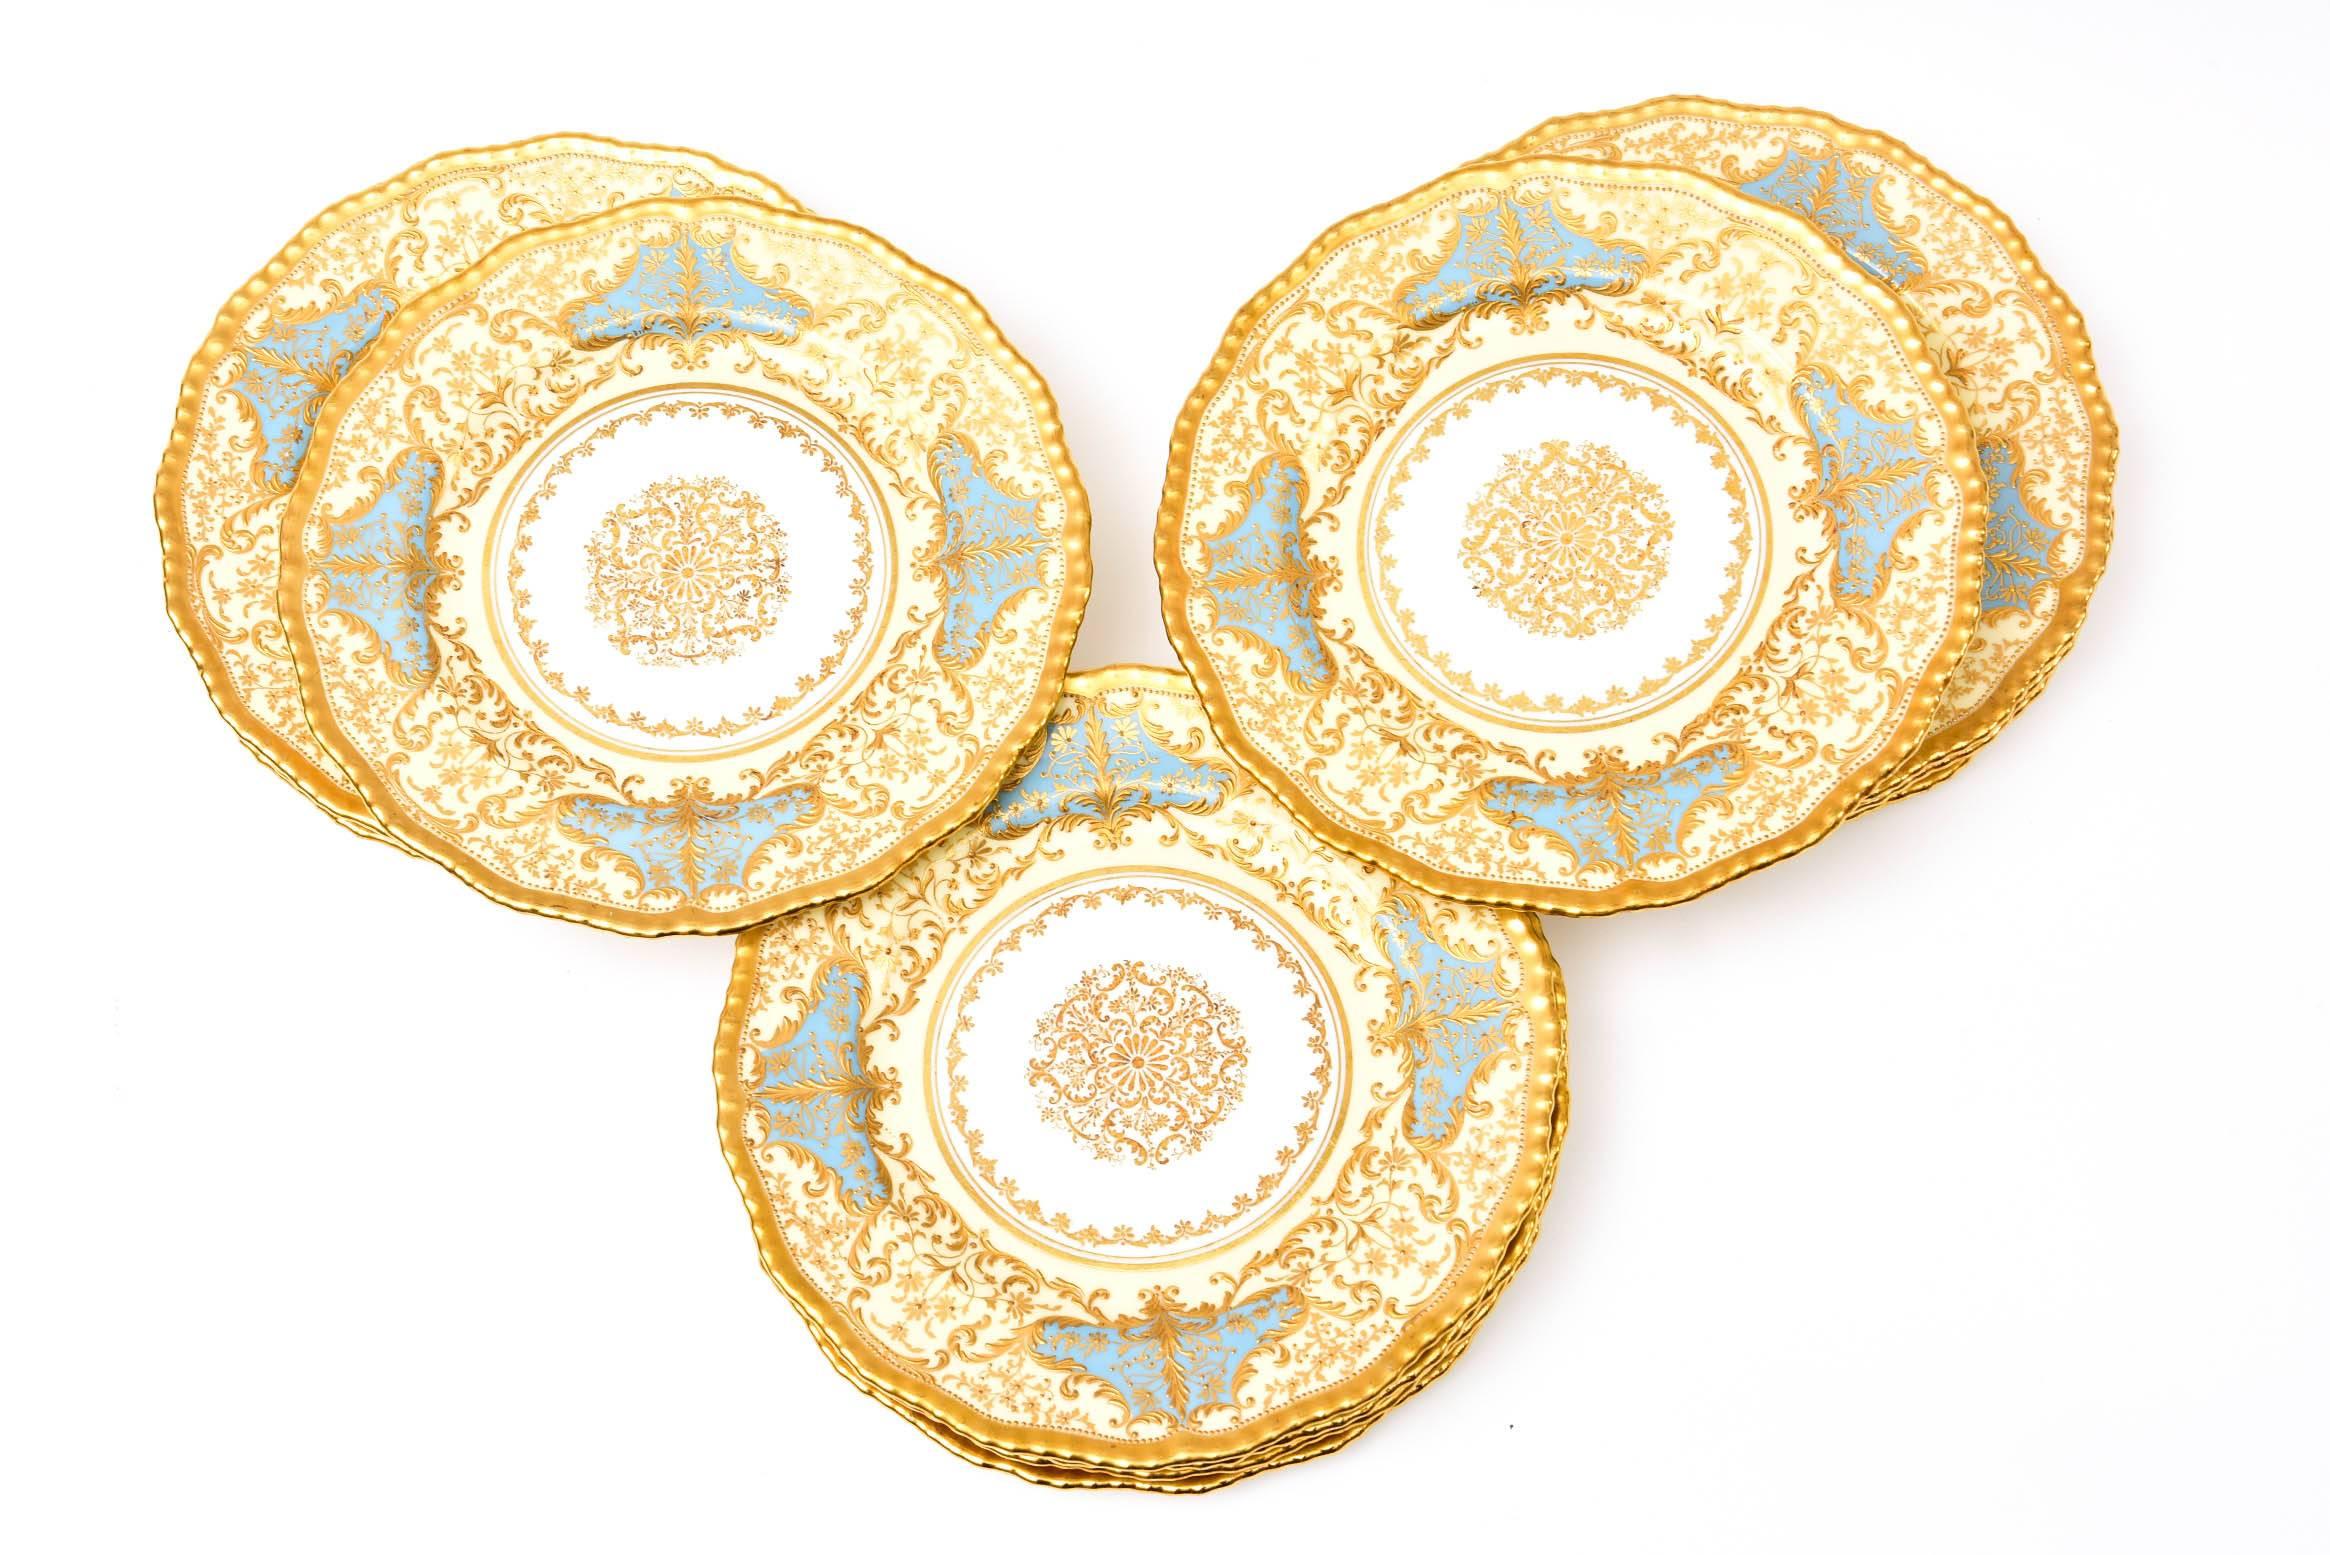 An exceptional set of vibrant plates by Royal Doulton, England. These antique plates, circa 1910 feature a turquoise almost cerulean colored cartouche in their collars. Surrounded by raised and hand tooled gilding, a shaped gadroon edge and a pretty